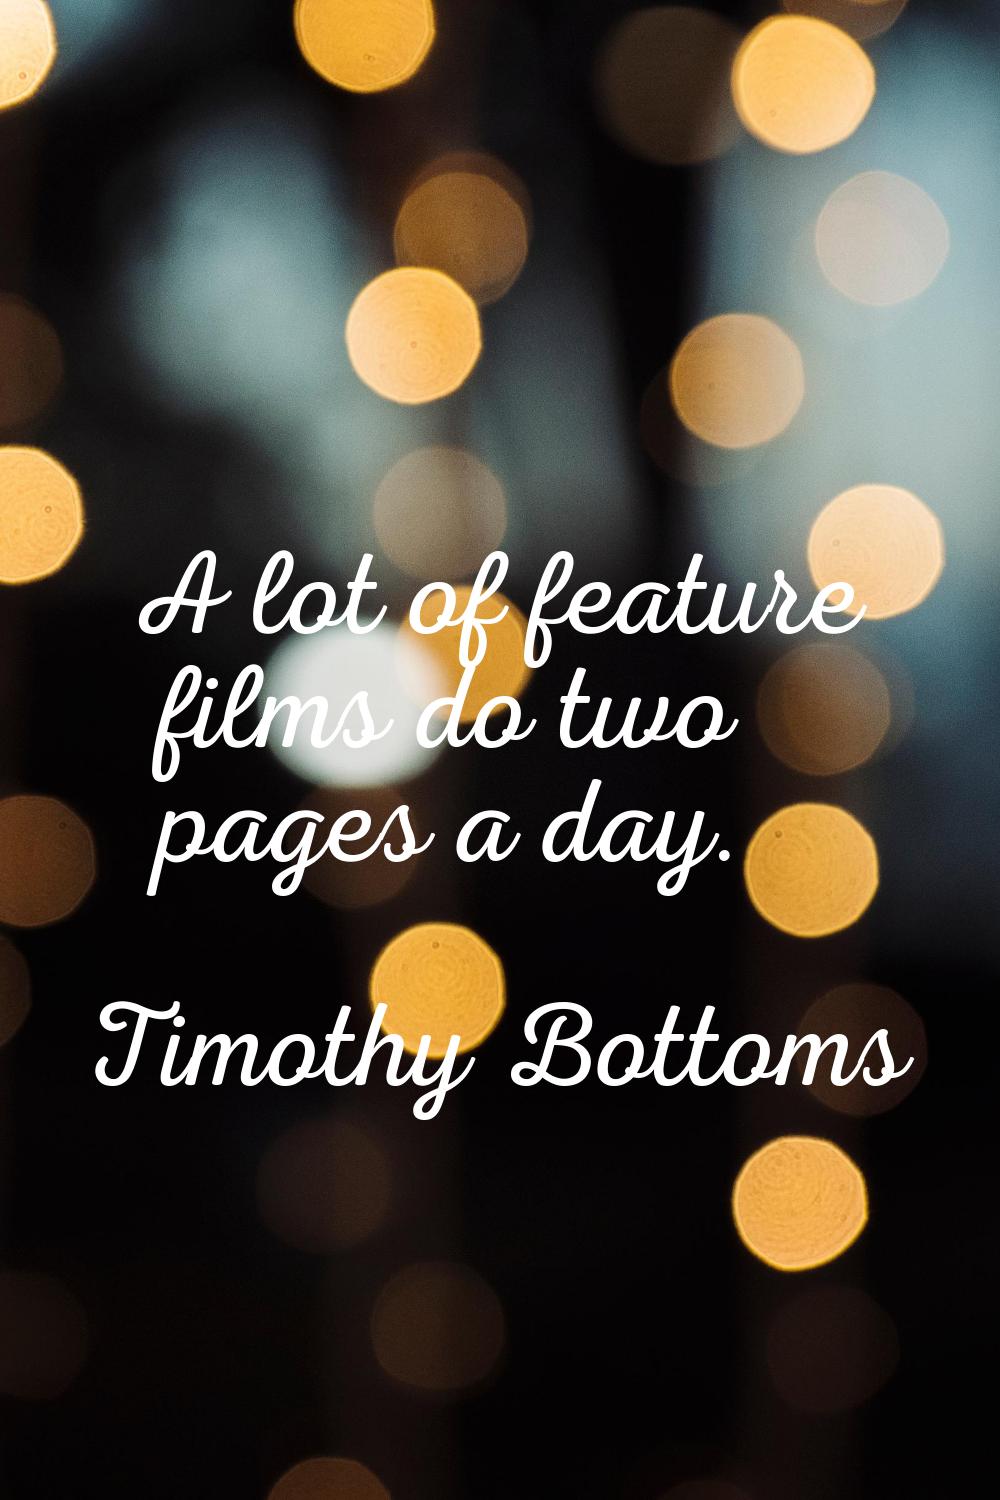 A lot of feature films do two pages a day.